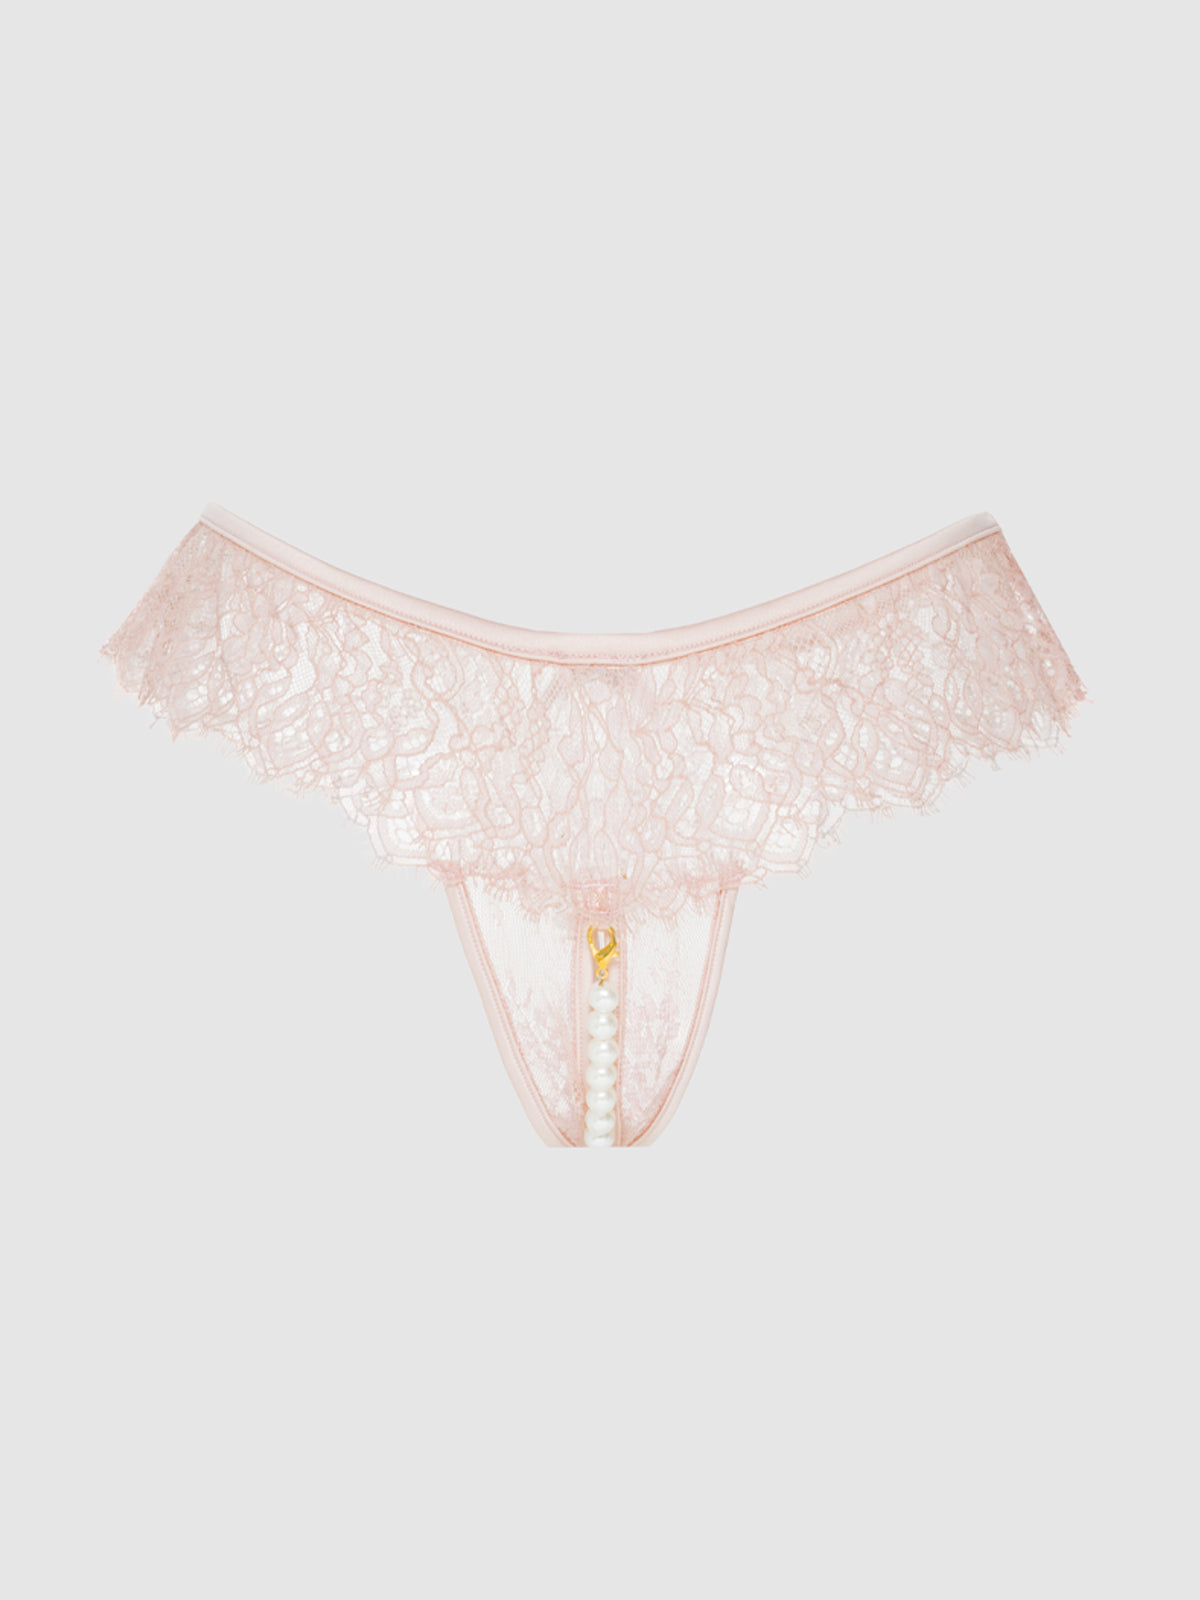 Rosalind Lace & Pearl Crotchless Thong - Fredericks of Hollywood